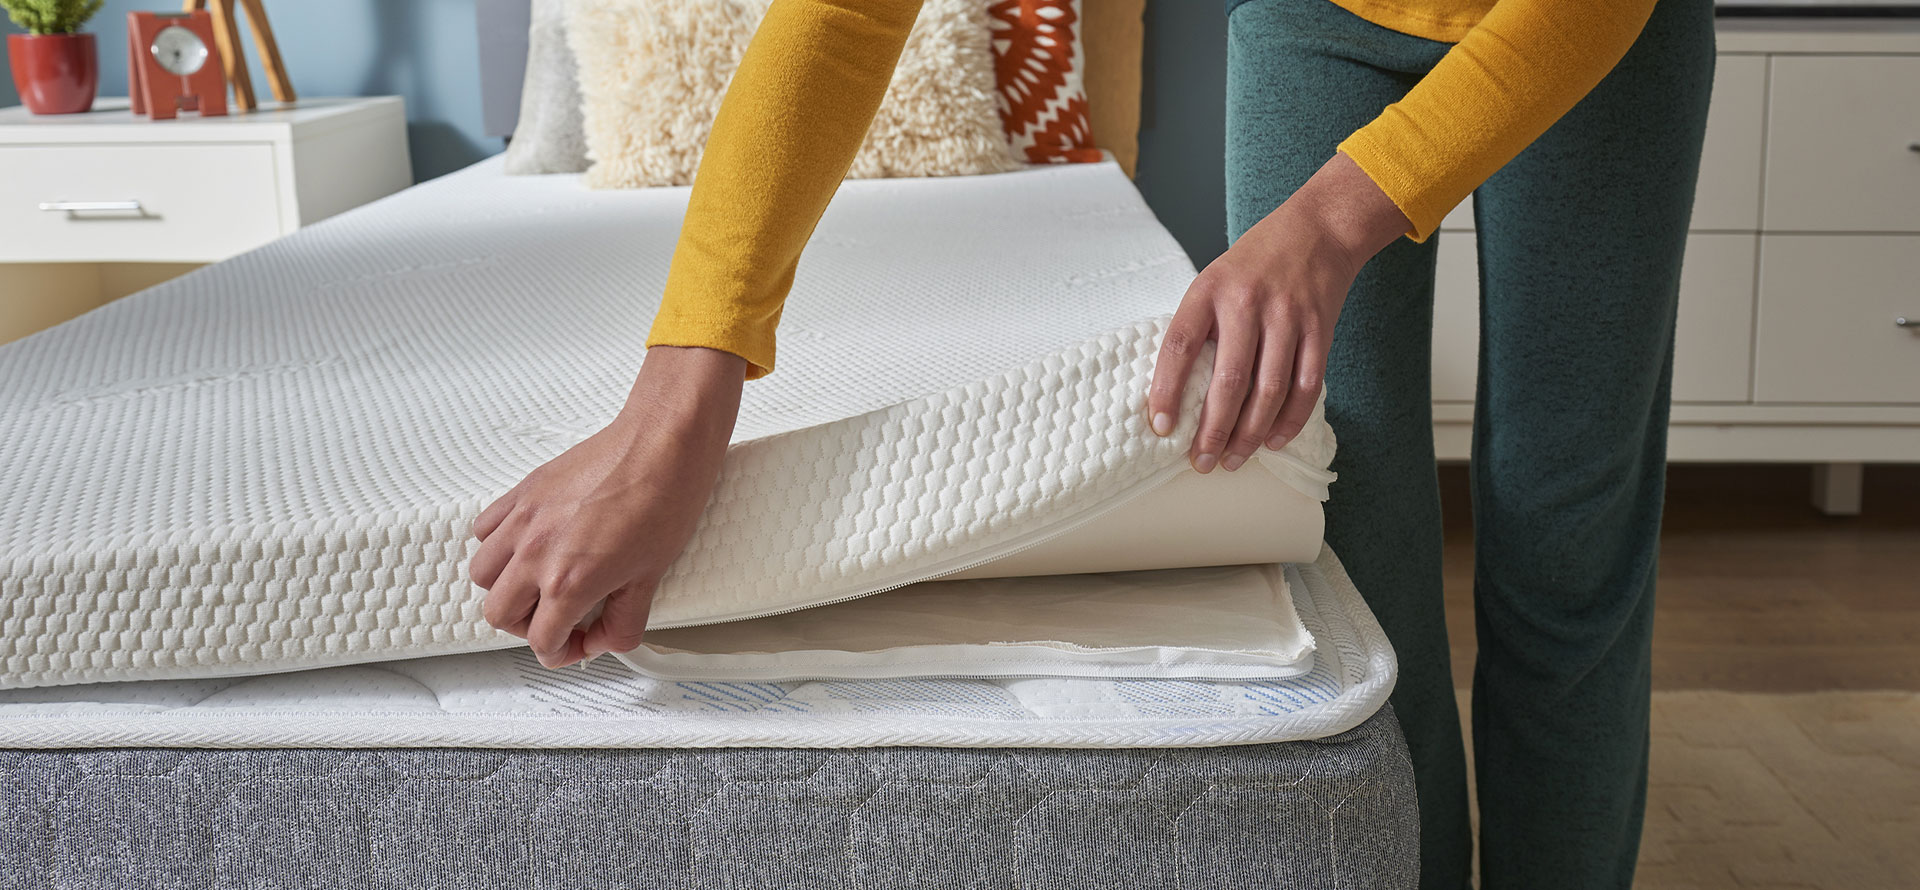 Cooling mattress pad with woman.